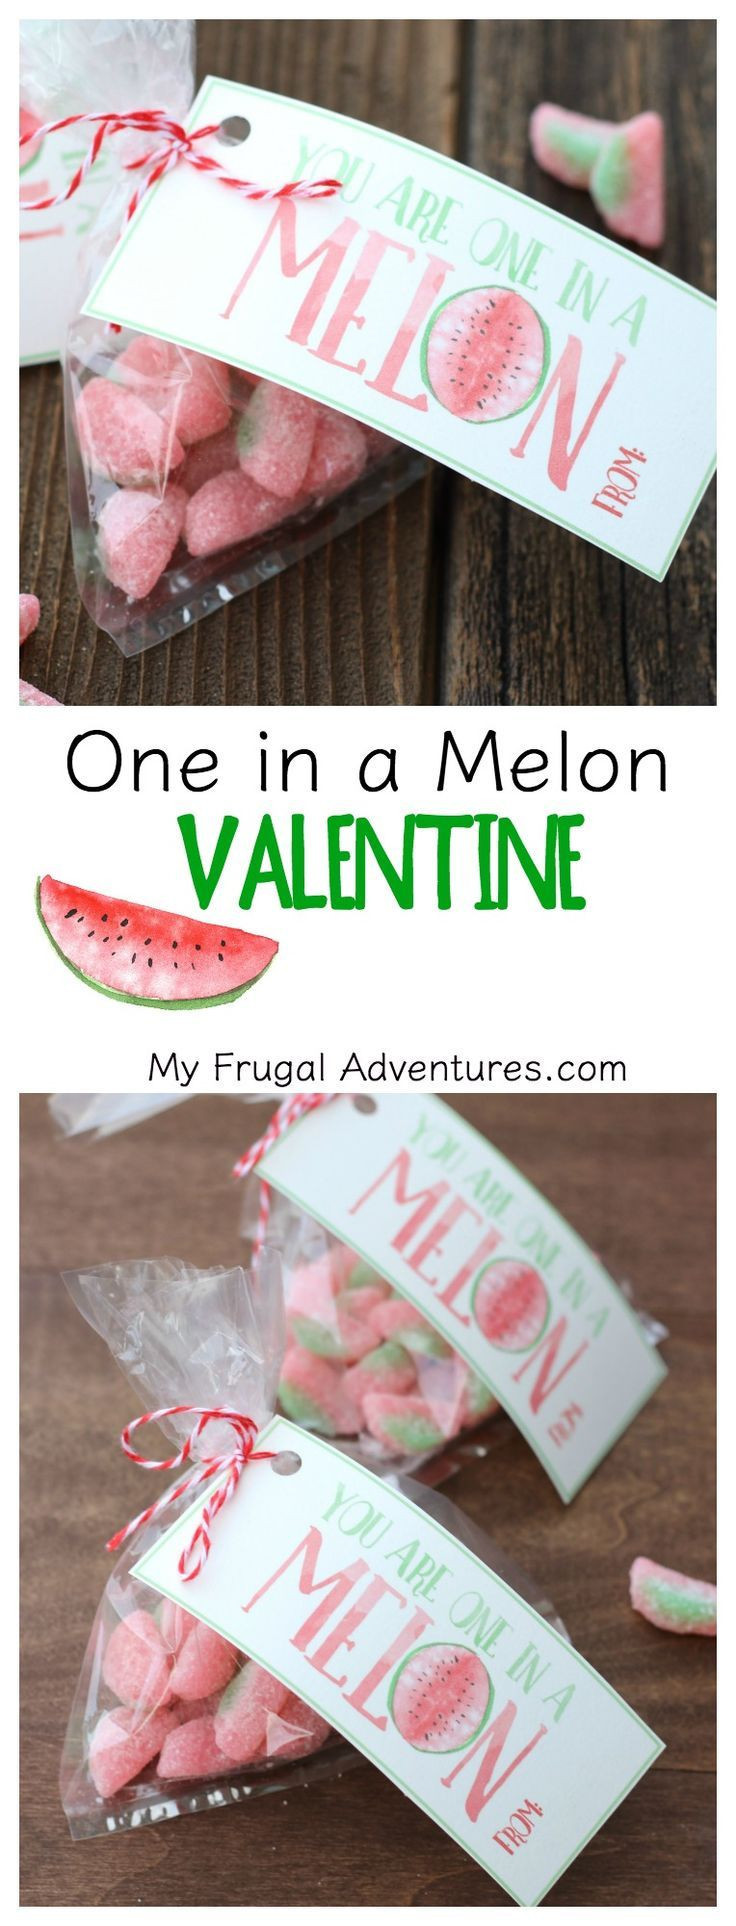 Candy Puns For Valentines Day
 Best 21 Candy Puns for Valentines Day Best Round Up